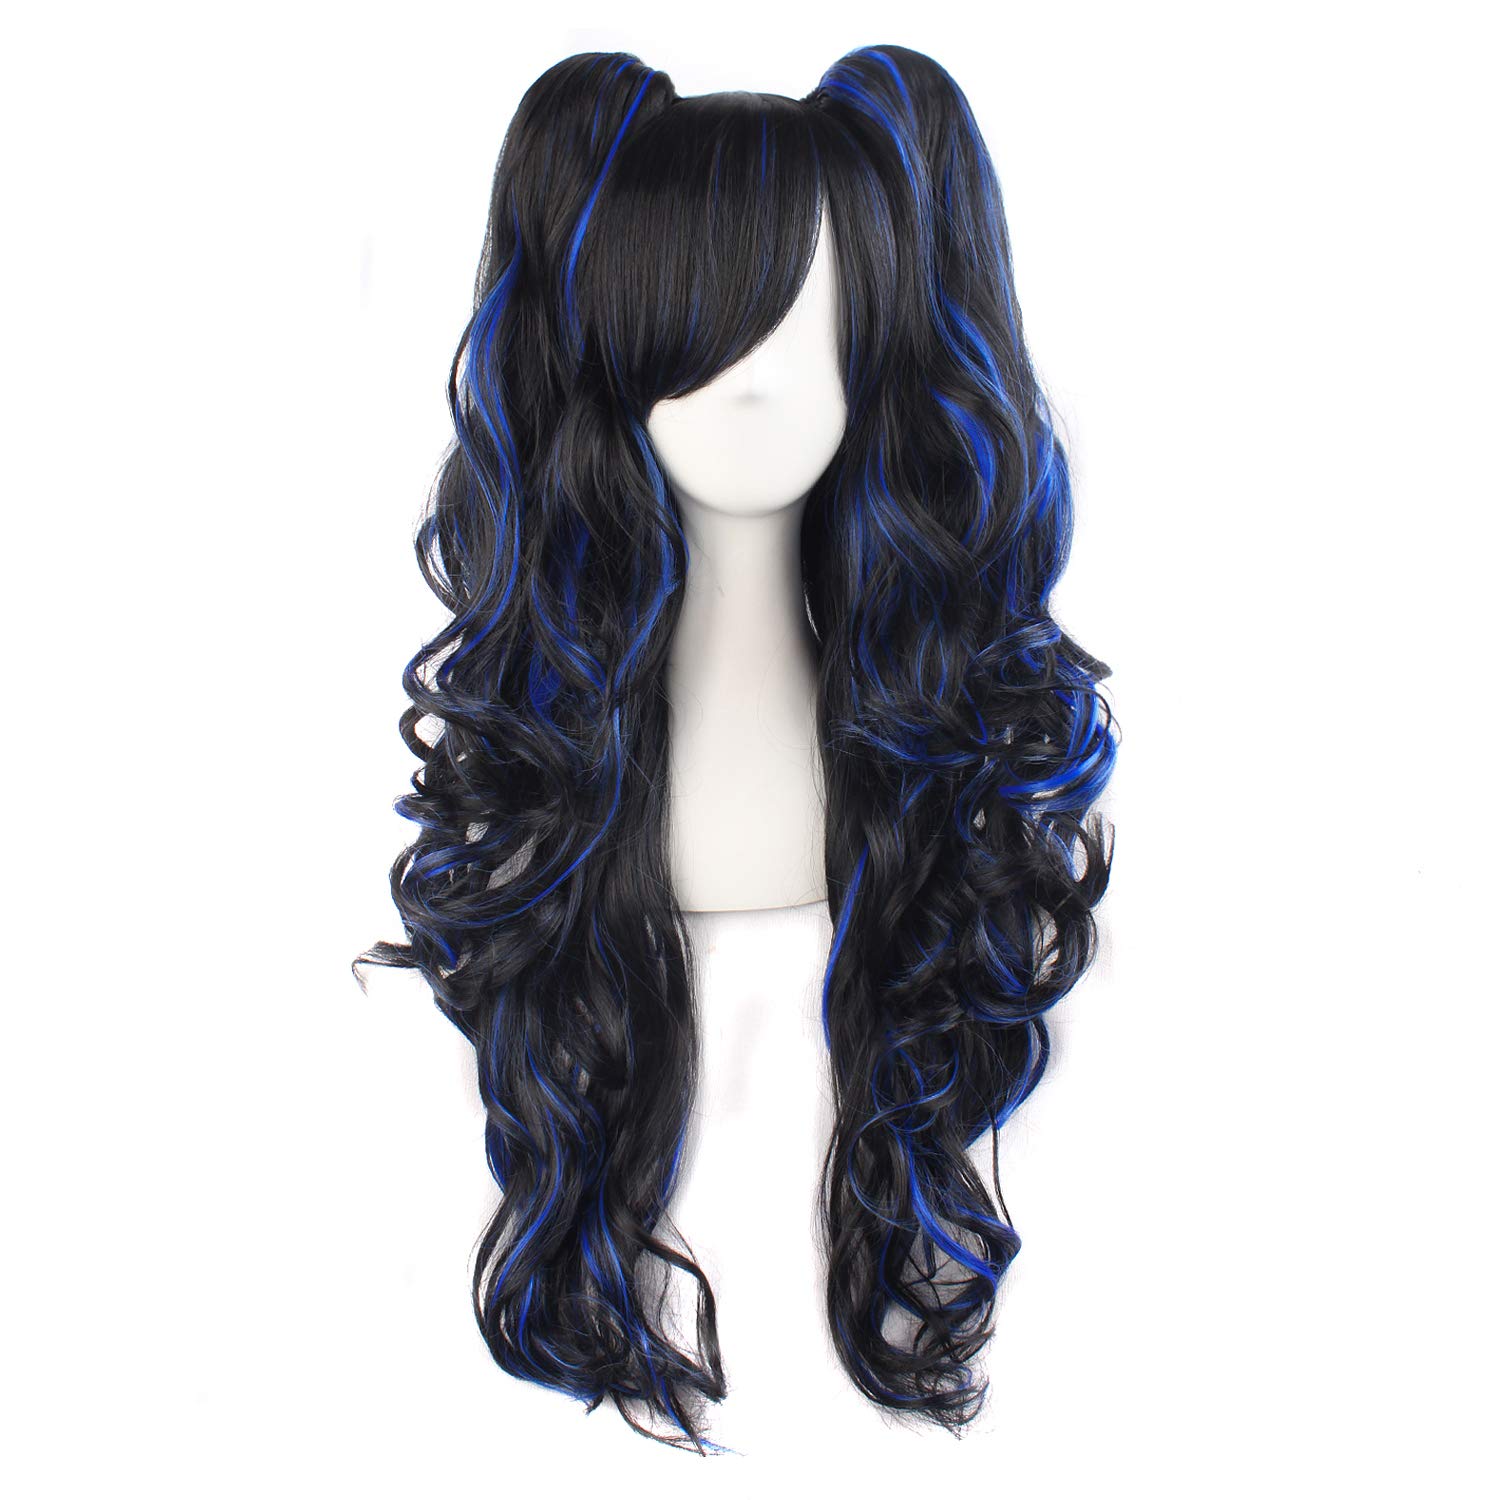 Price:$20.99    MapofBeauty Multi-color Lolita Long Curly Clip on Ponytails Cosplay Wig (Black/Blue)  Clothing